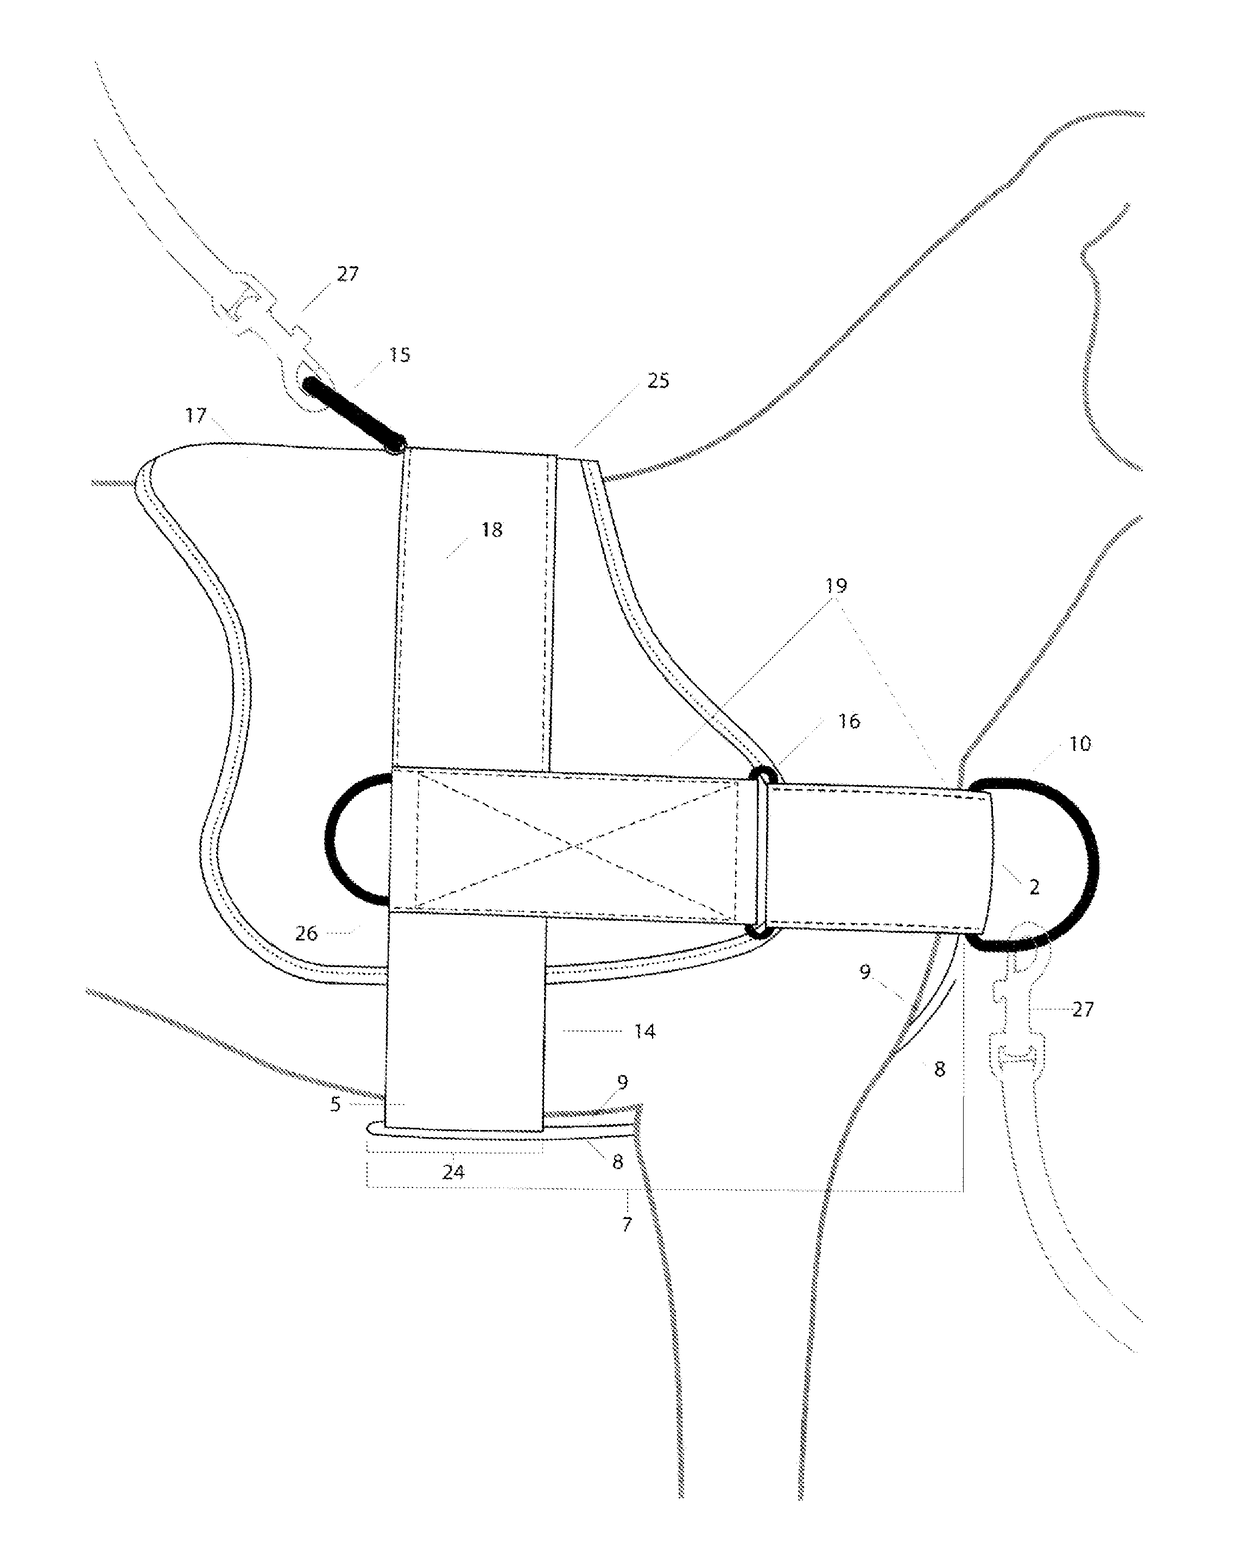 Pressure distribution element holding a ring for chest harnesses